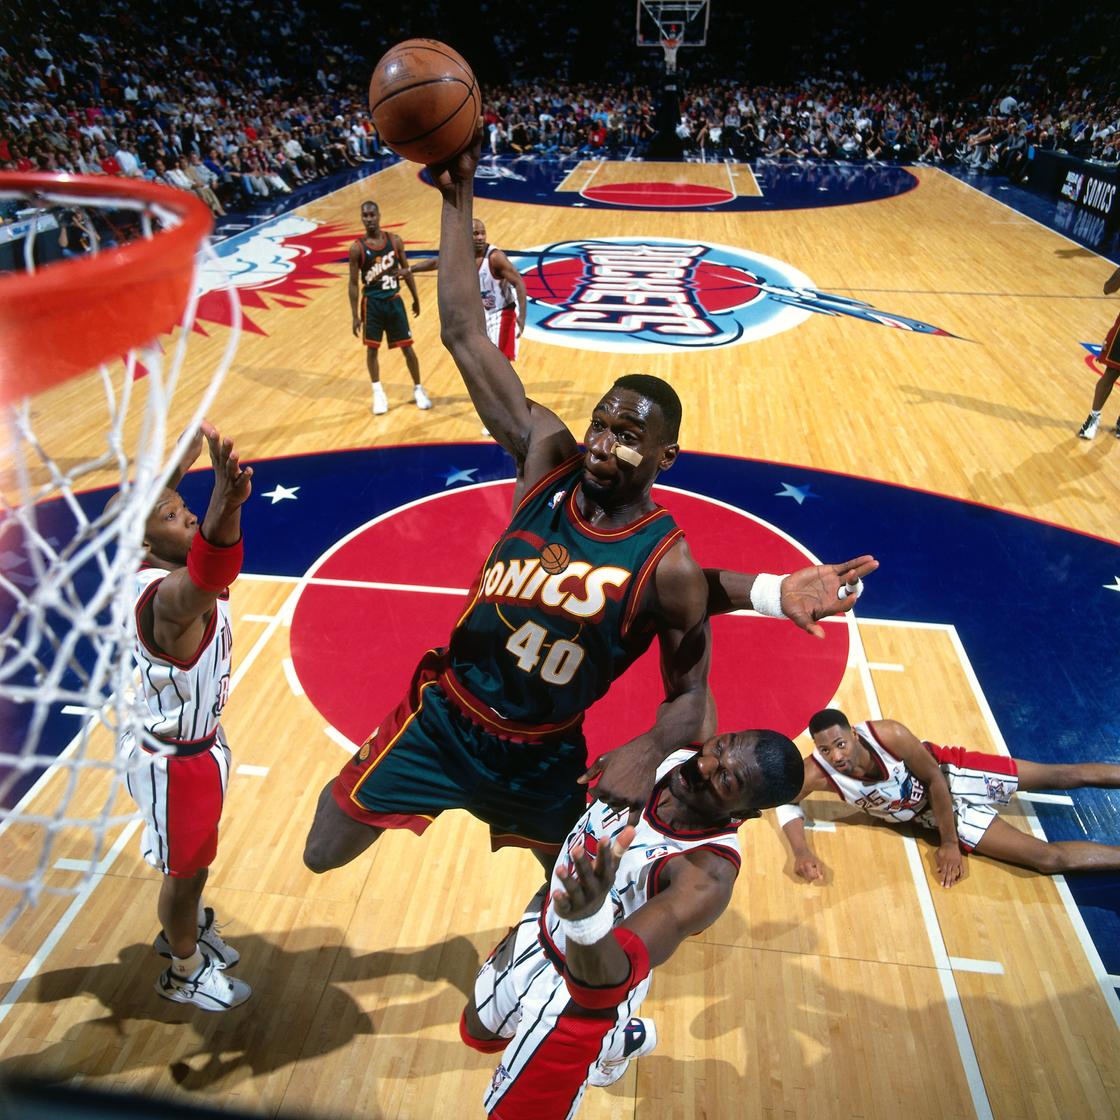 Shawn Kemp is one of the best dunkers of all time.